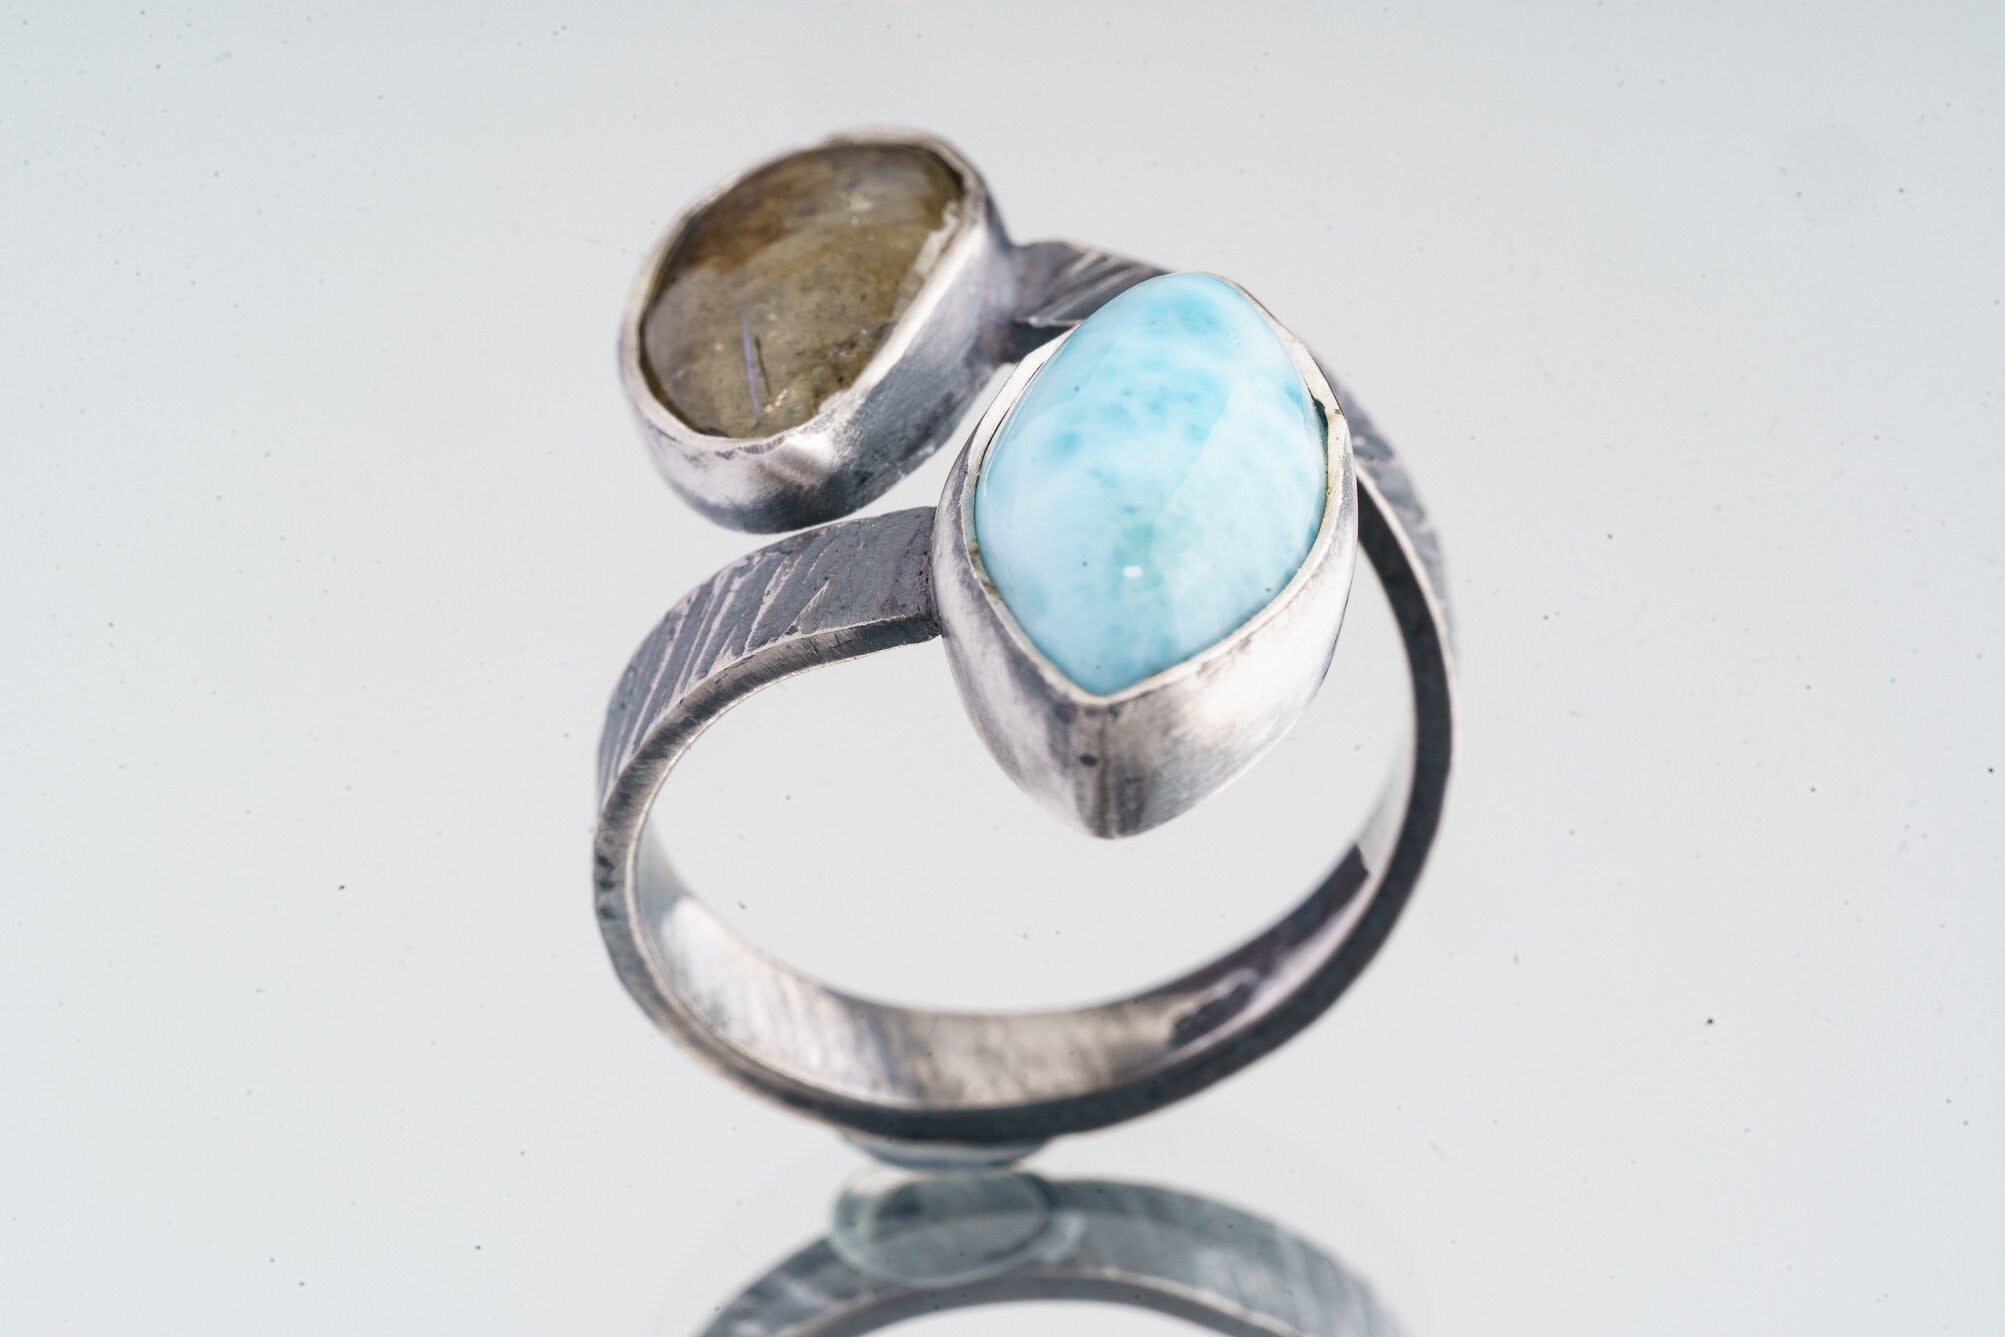 Larimar & Labradorite Eye - 925 Sterling Silver - Double Stone - Textured, Oxidised - Open Ring Band - Adjustable US 4-10 - NO/10